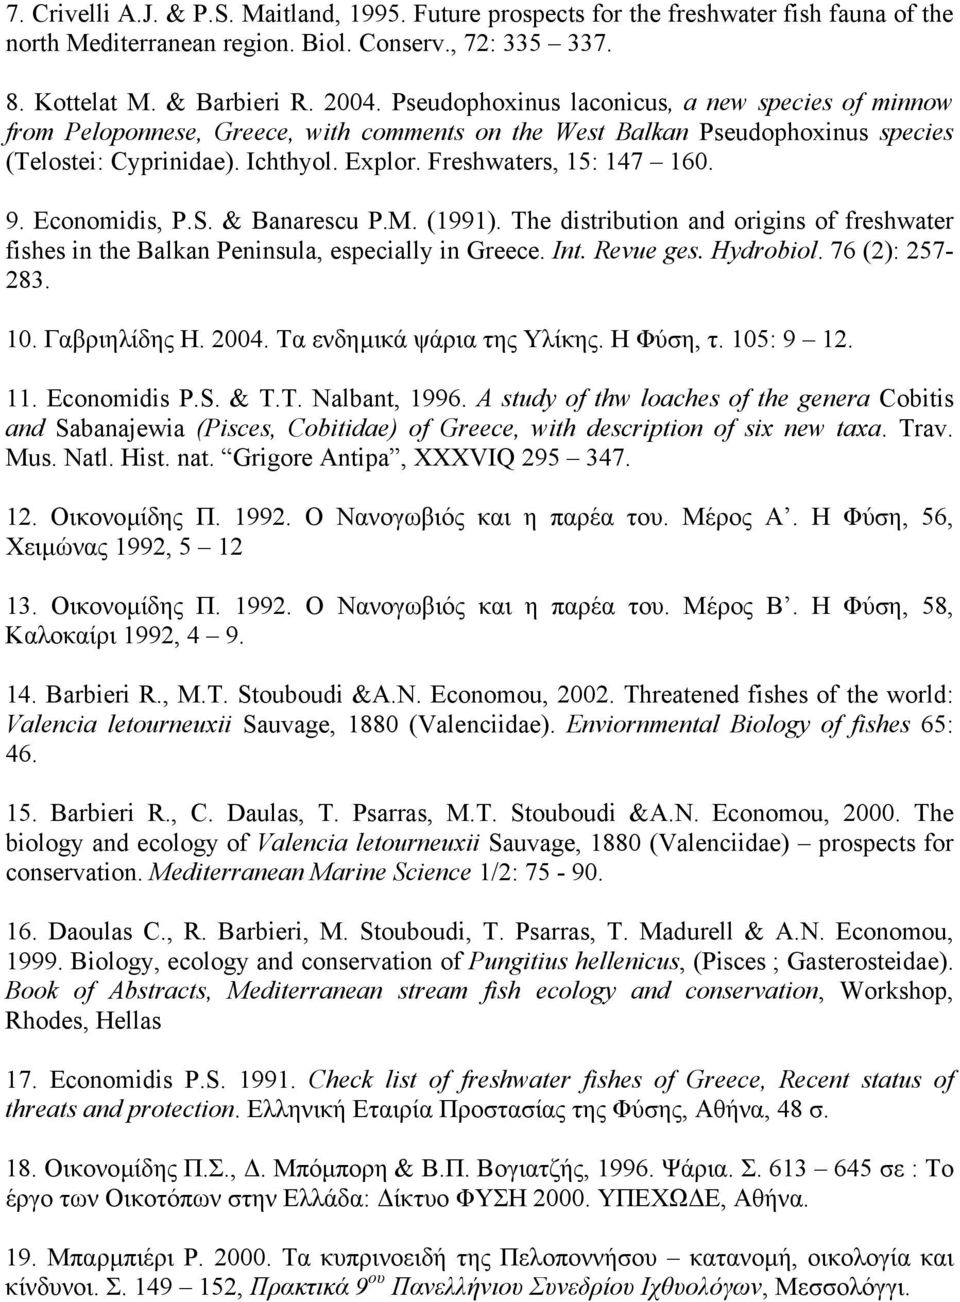 9. Economidis, P.S. & Banarescu P.M. (1991). The distribution and origins of freshwater fishes in the Balkan Peninsula, especially in Greece. Int. Revue ges. Hydrobiol. 76 (2): 257-283. 10.